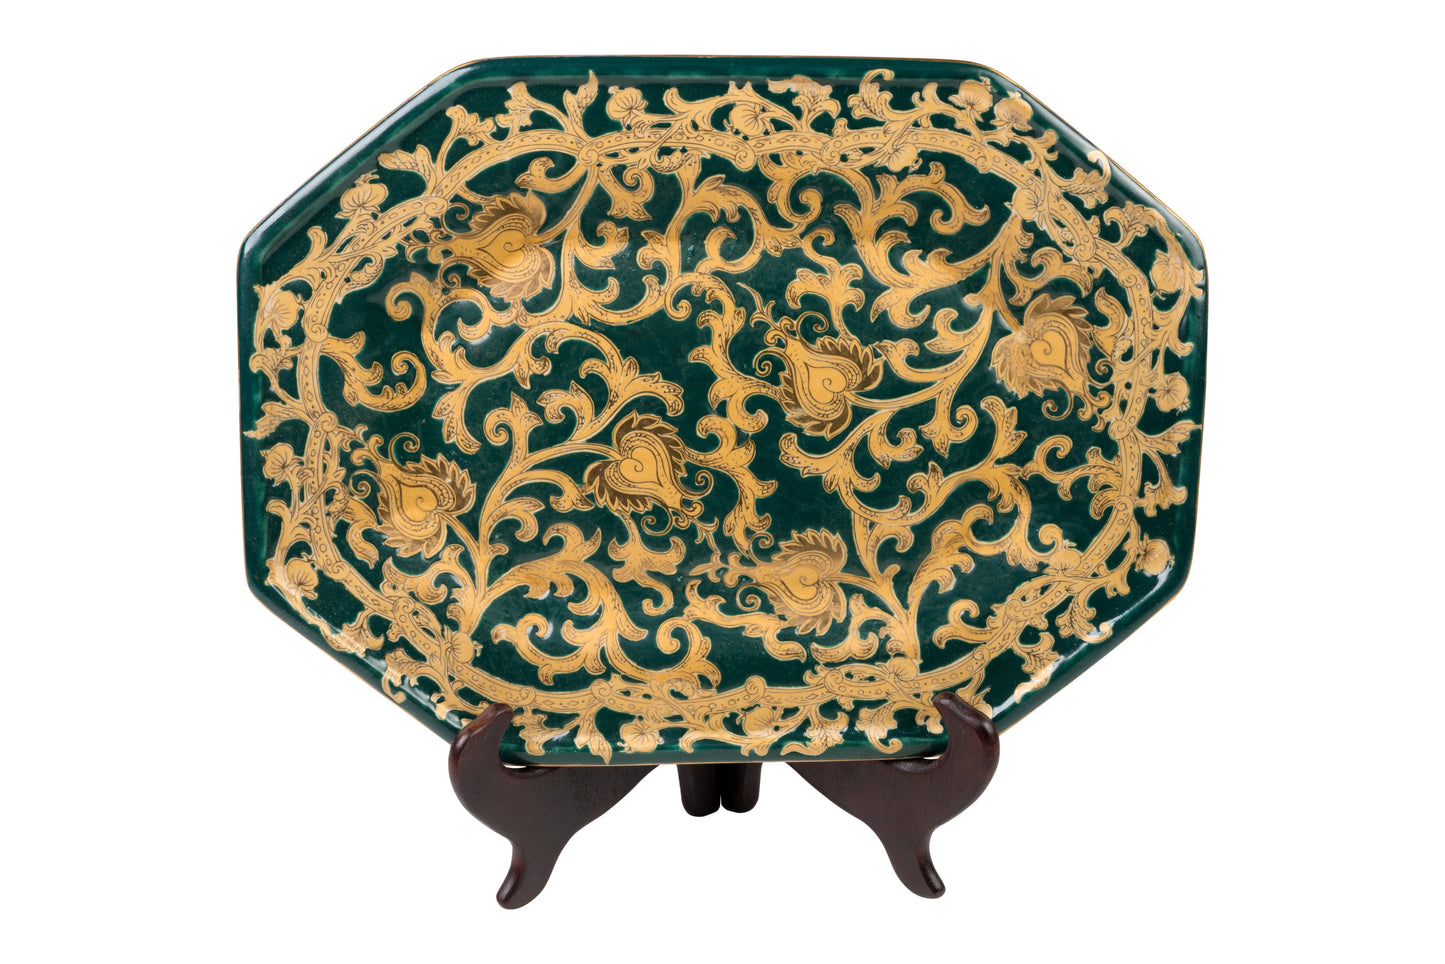 Green and Gold Tapestry Pattern Porcelain Hexagonal Tray 14" x 10.5"